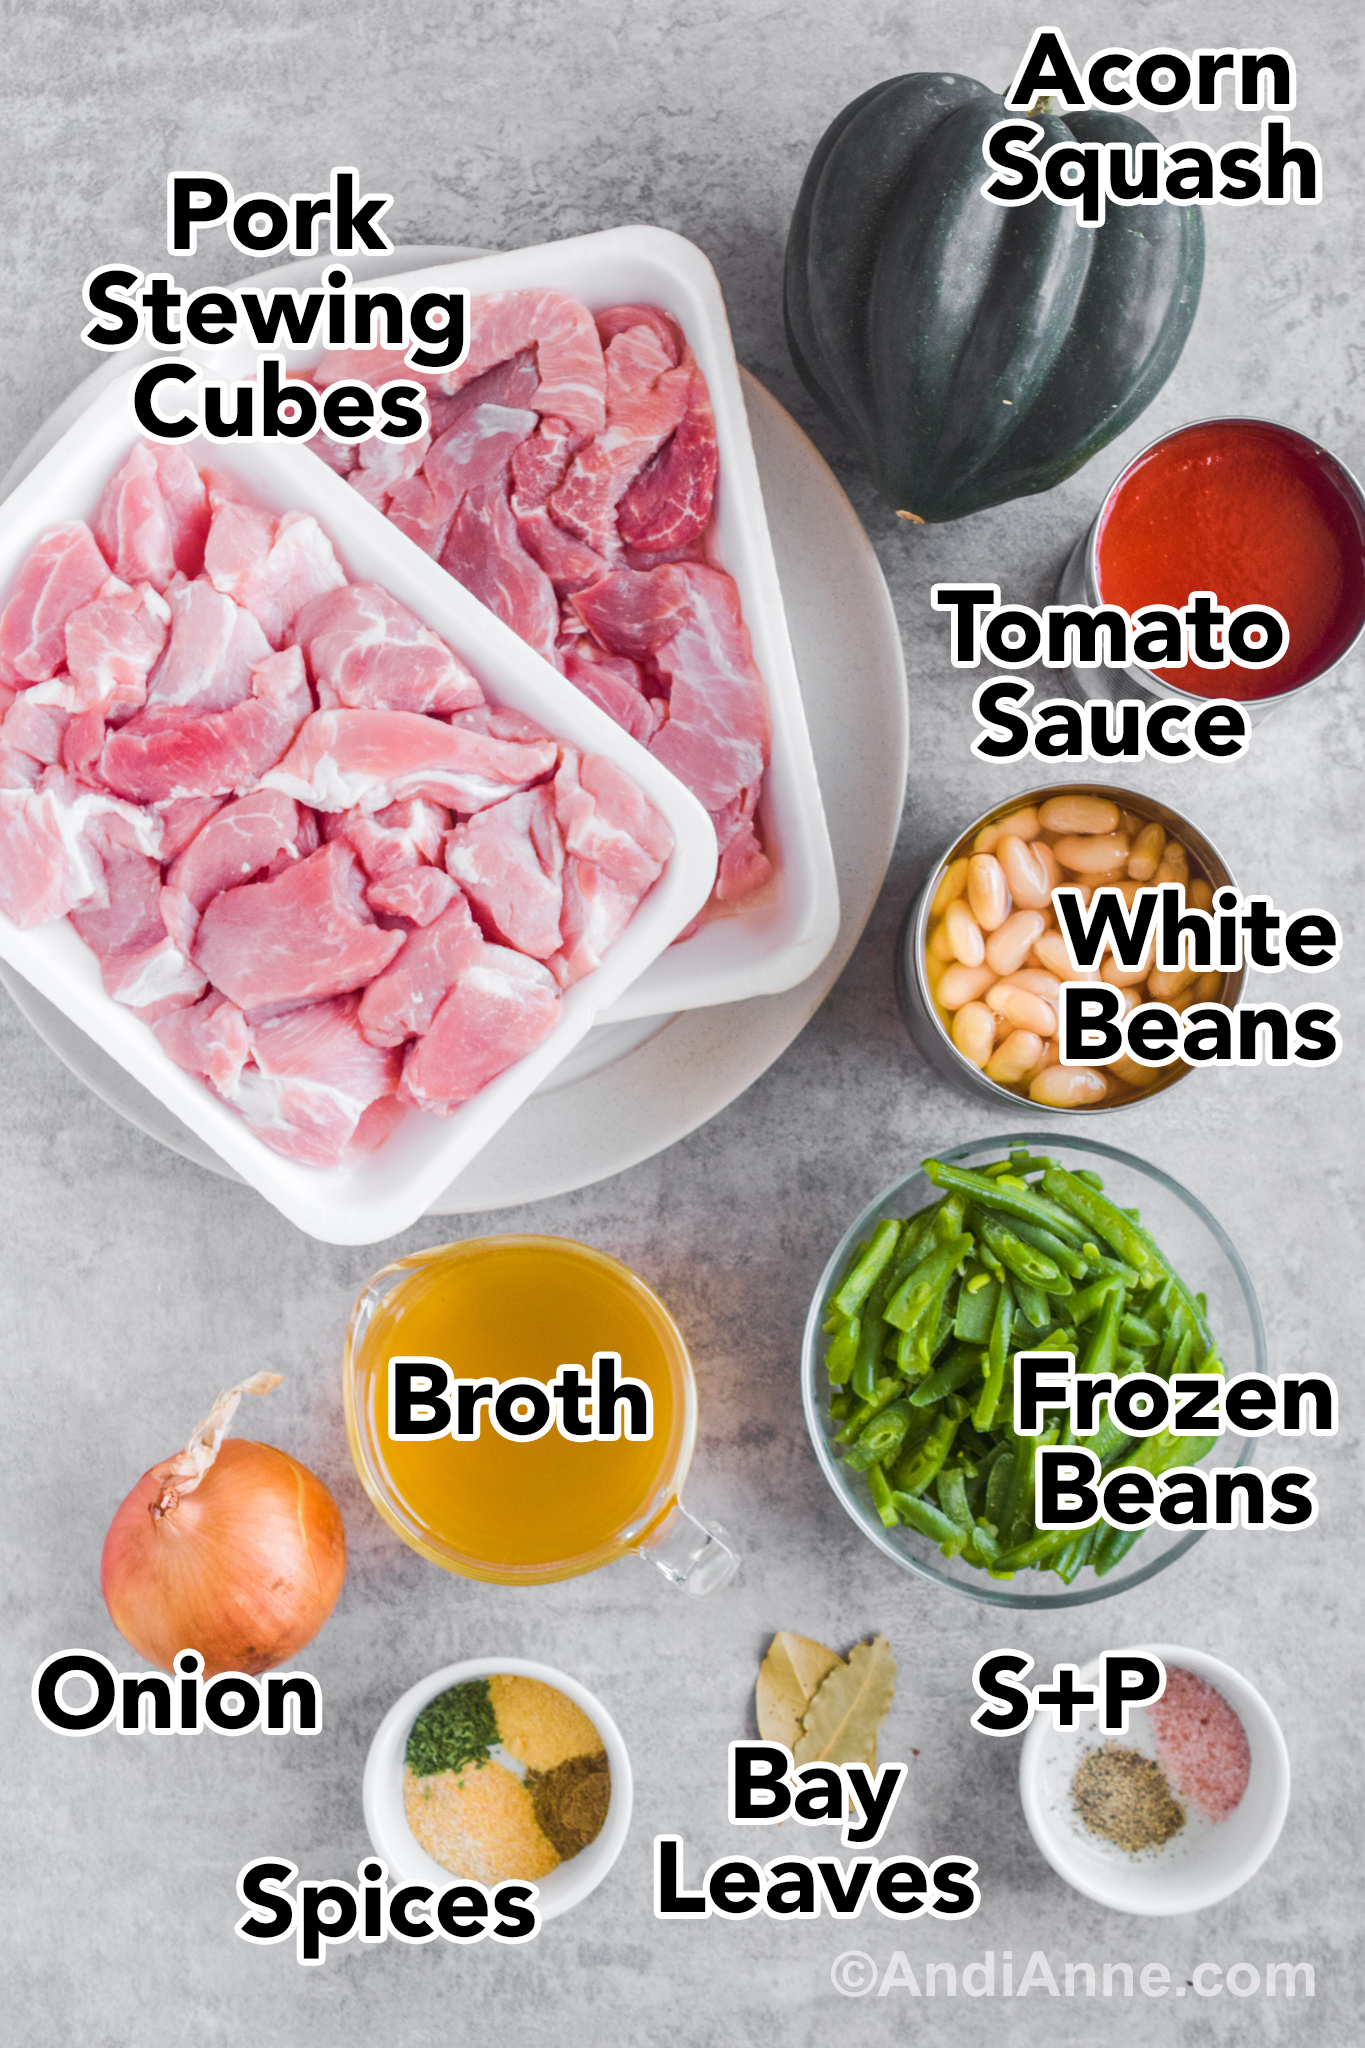 Recipe ingredients on a counter including two packages of raw pork stewing cubes, acorn squash, can of tomato sauce, canned white beans, bowl of frozen beans, glass container of broth, onion and spices.